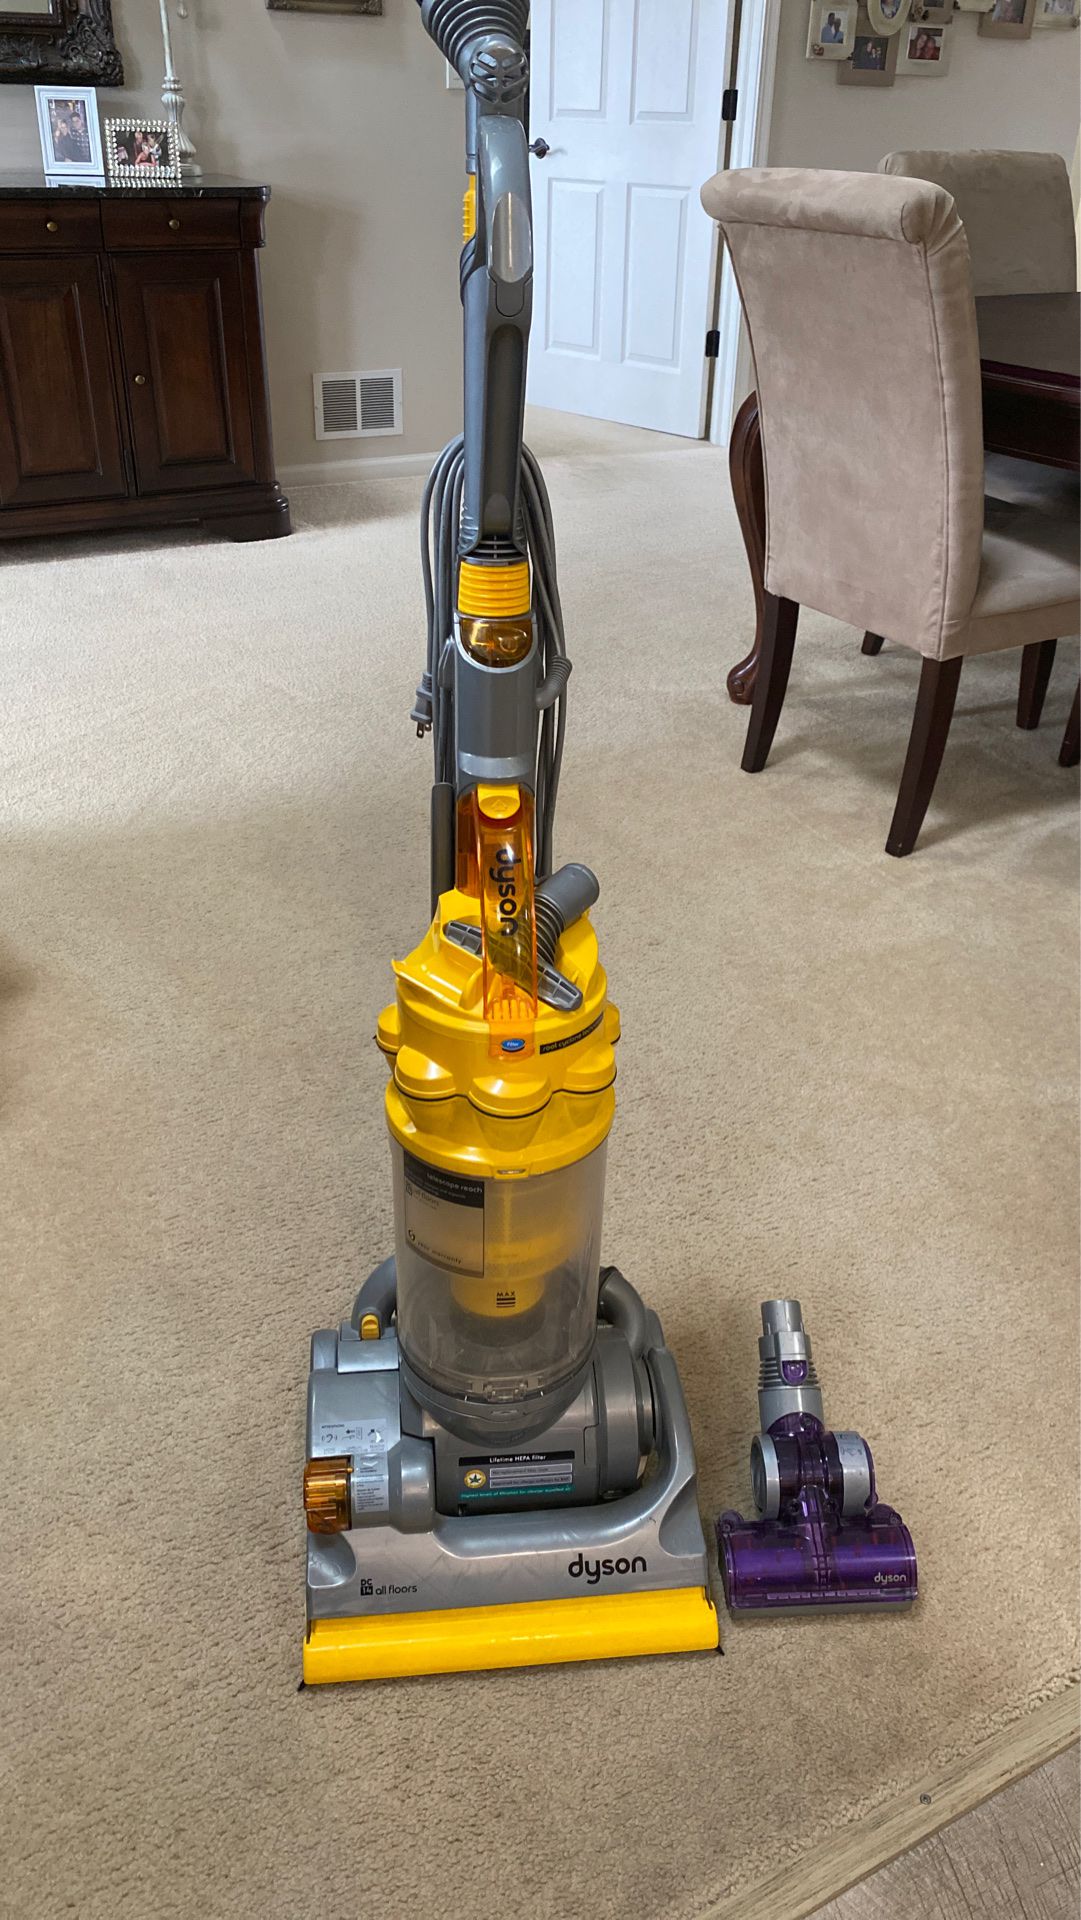 DYSON DC14 vacuum WORKS GREAT!!!!